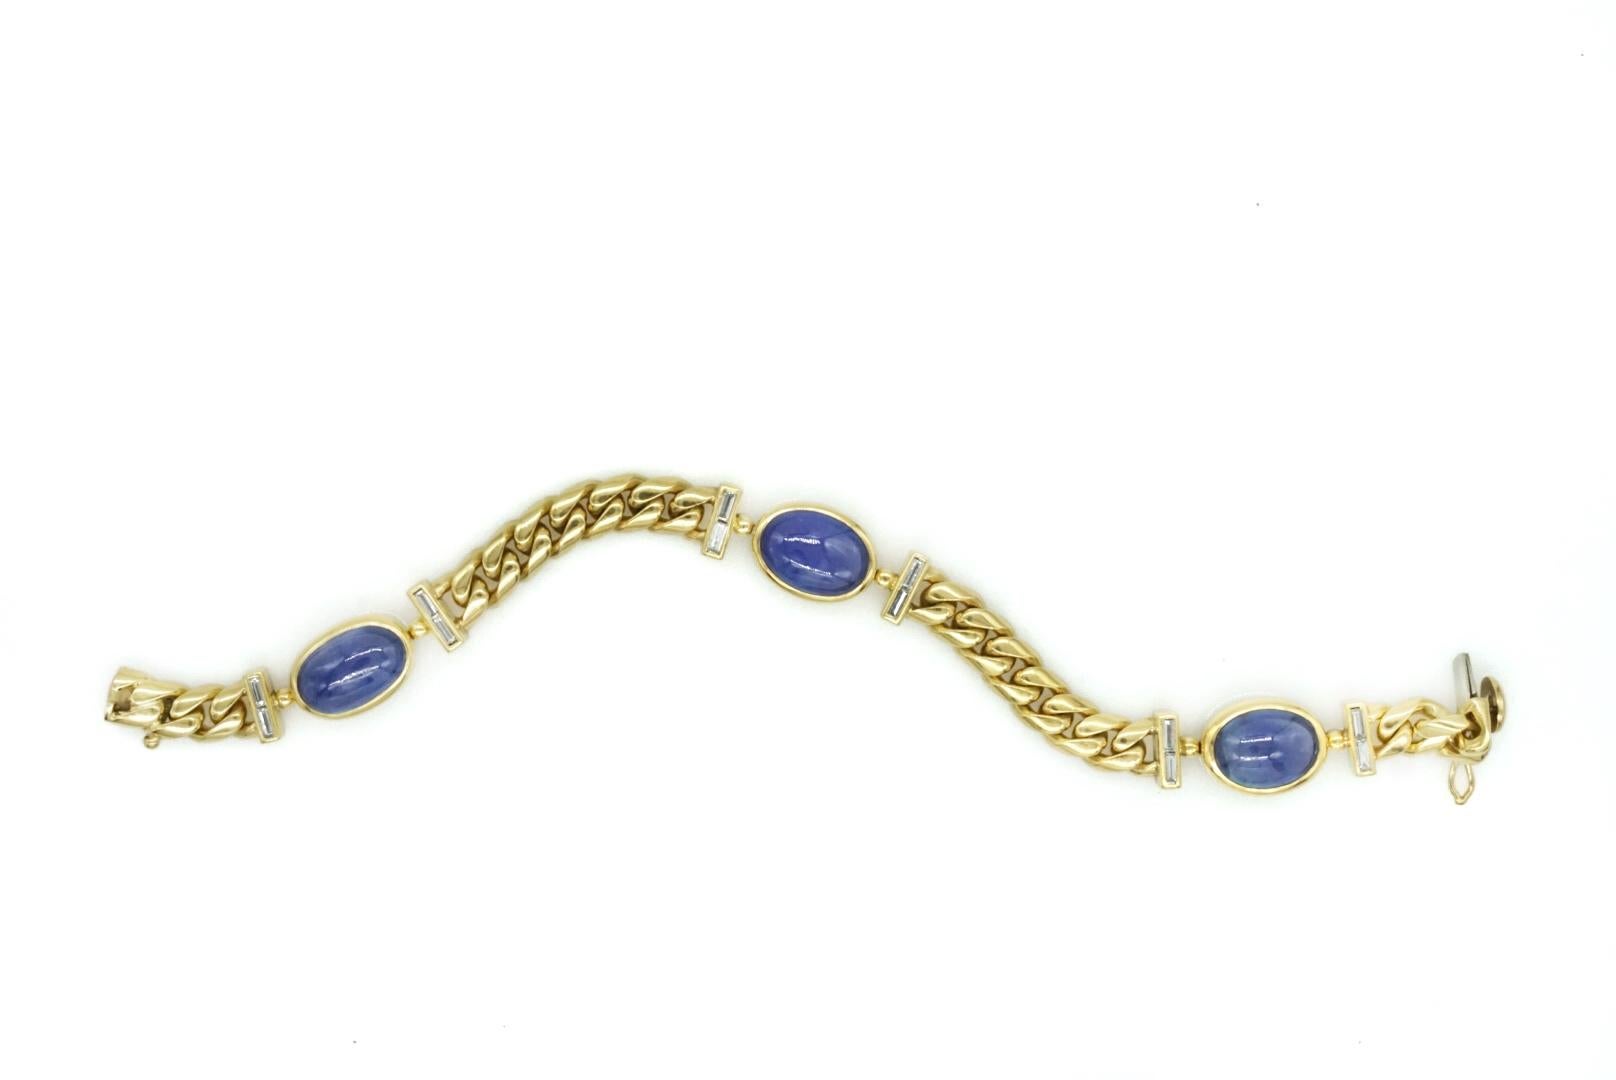 Bulgari Cabochon Blue Sapphire and Diamonds Bracelet mounted in 18k Yellow Gold. Made in Italy, circa 1970. Certificate for sapphires available.